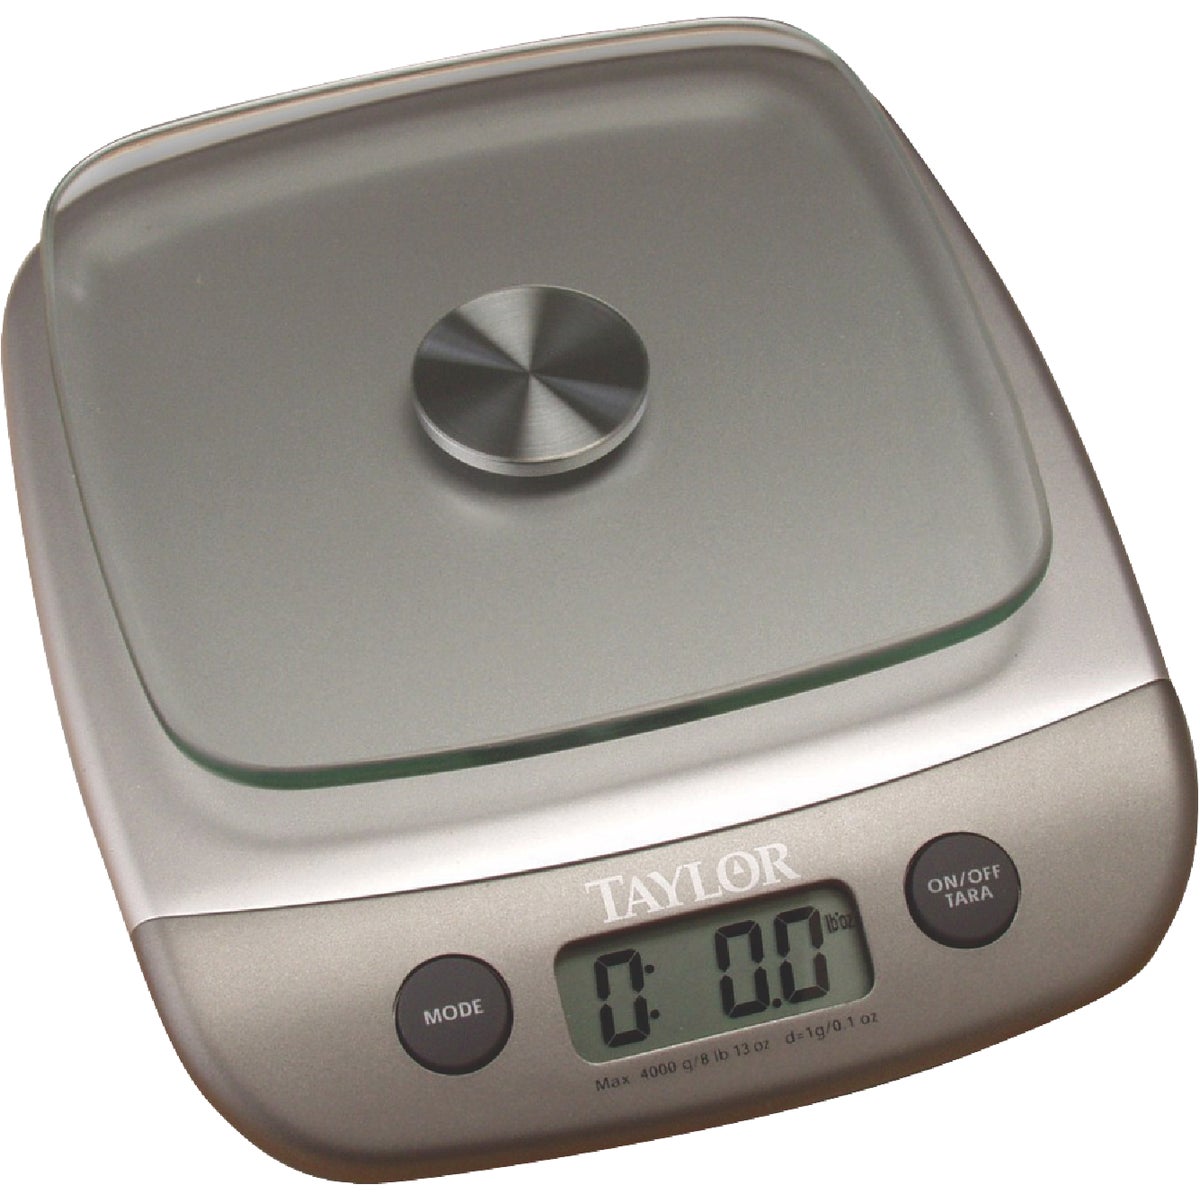 Item 601548, Classic digital kitchen scale. 8 lb. capacity. Weighs in ounces or grams.